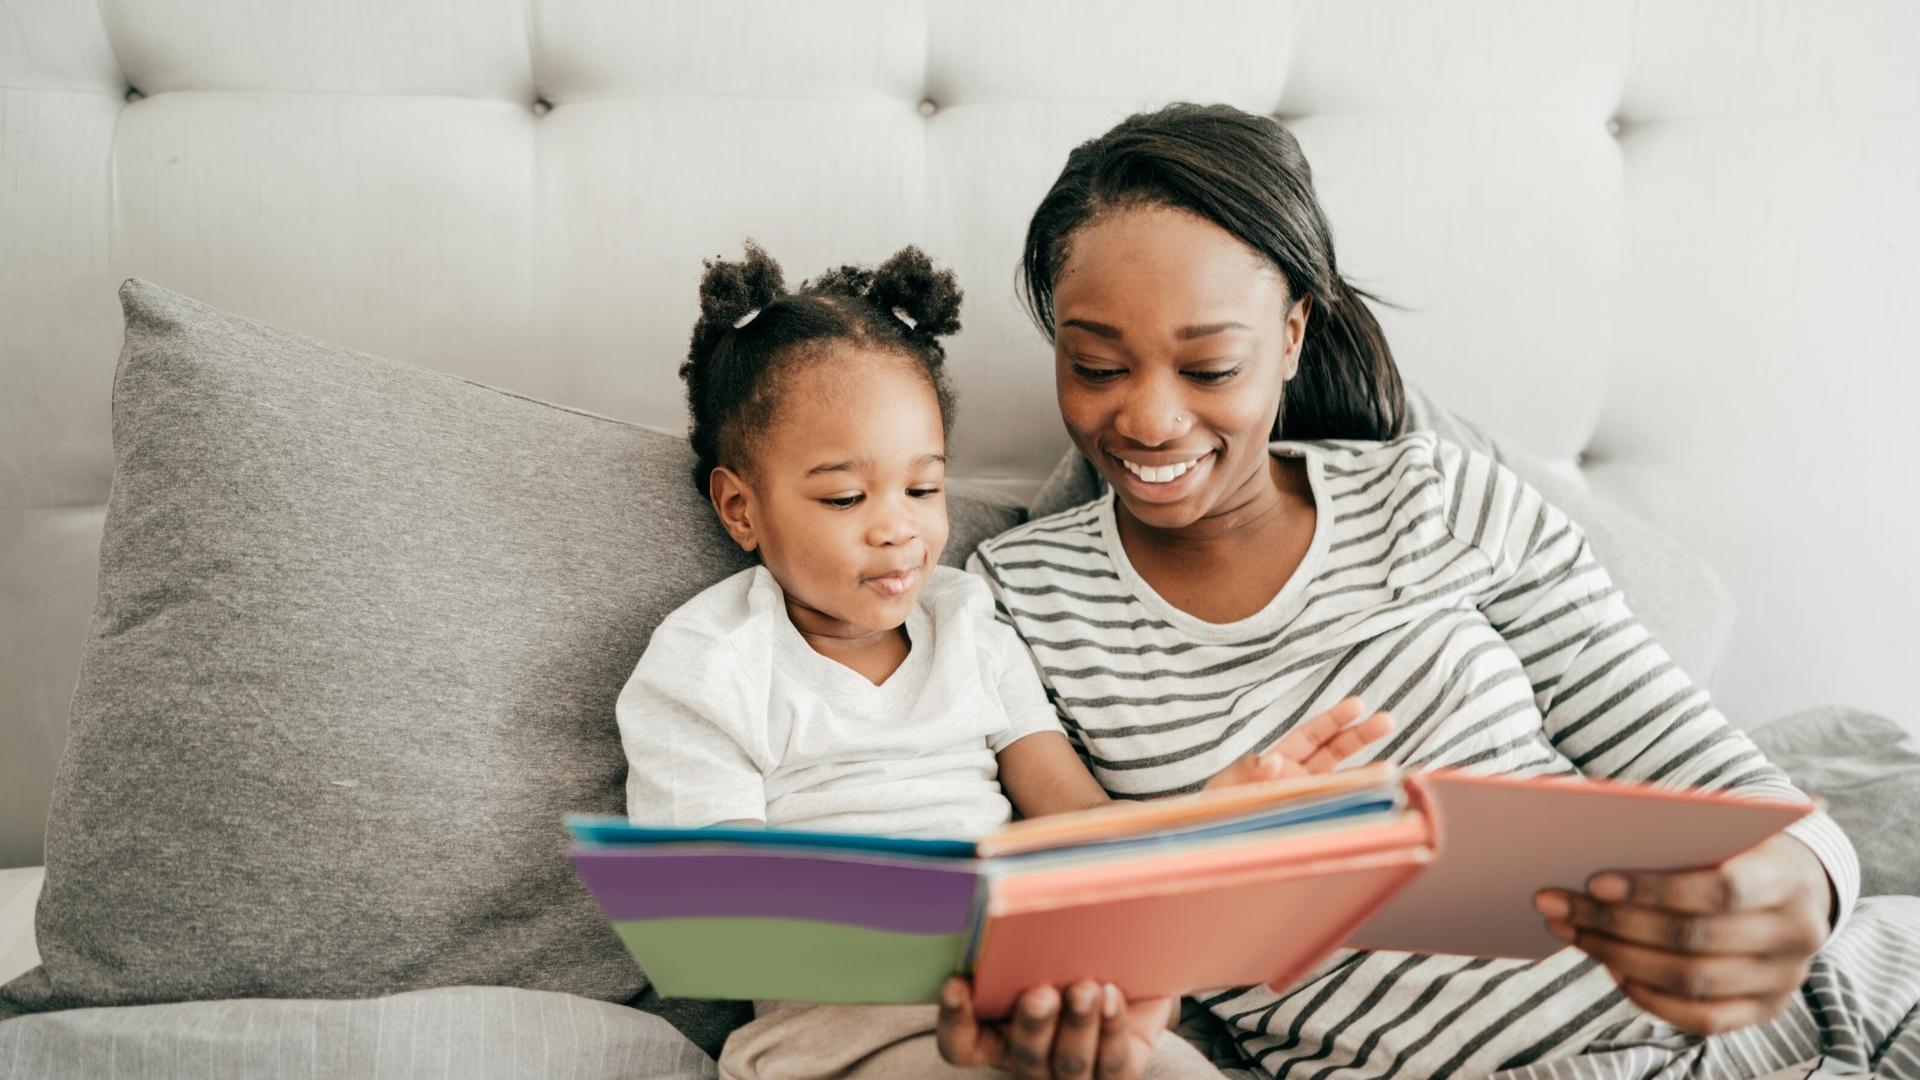 10 Great Books For Toddlers That Every Little Library Needs!